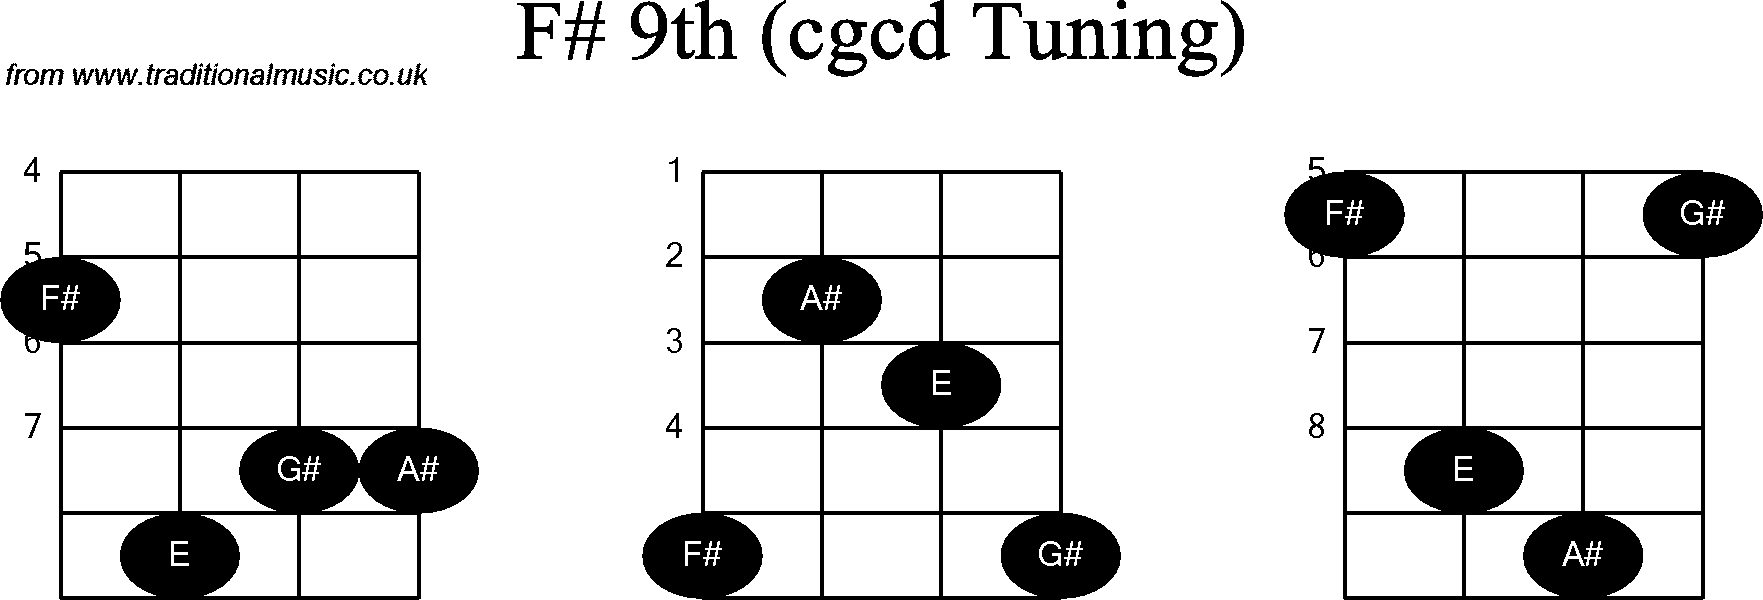 Chord diagrams for Banjo(Double C) F#9th